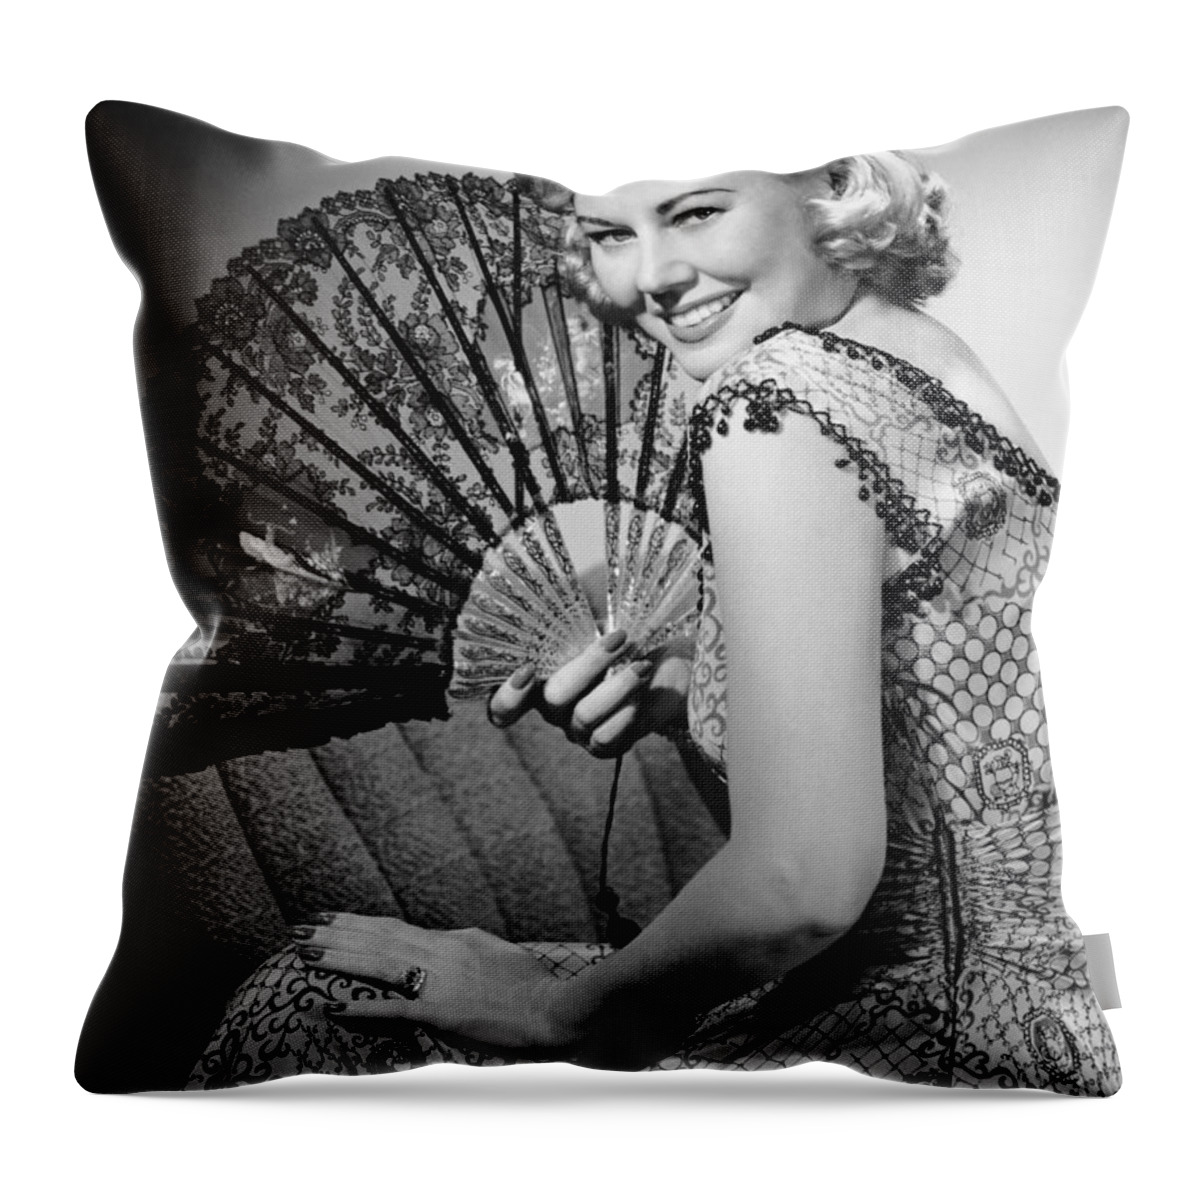 Three Quarter Length Throw Pillow featuring the photograph Portrait Of Blonde Woman Holding Fan by George Marks